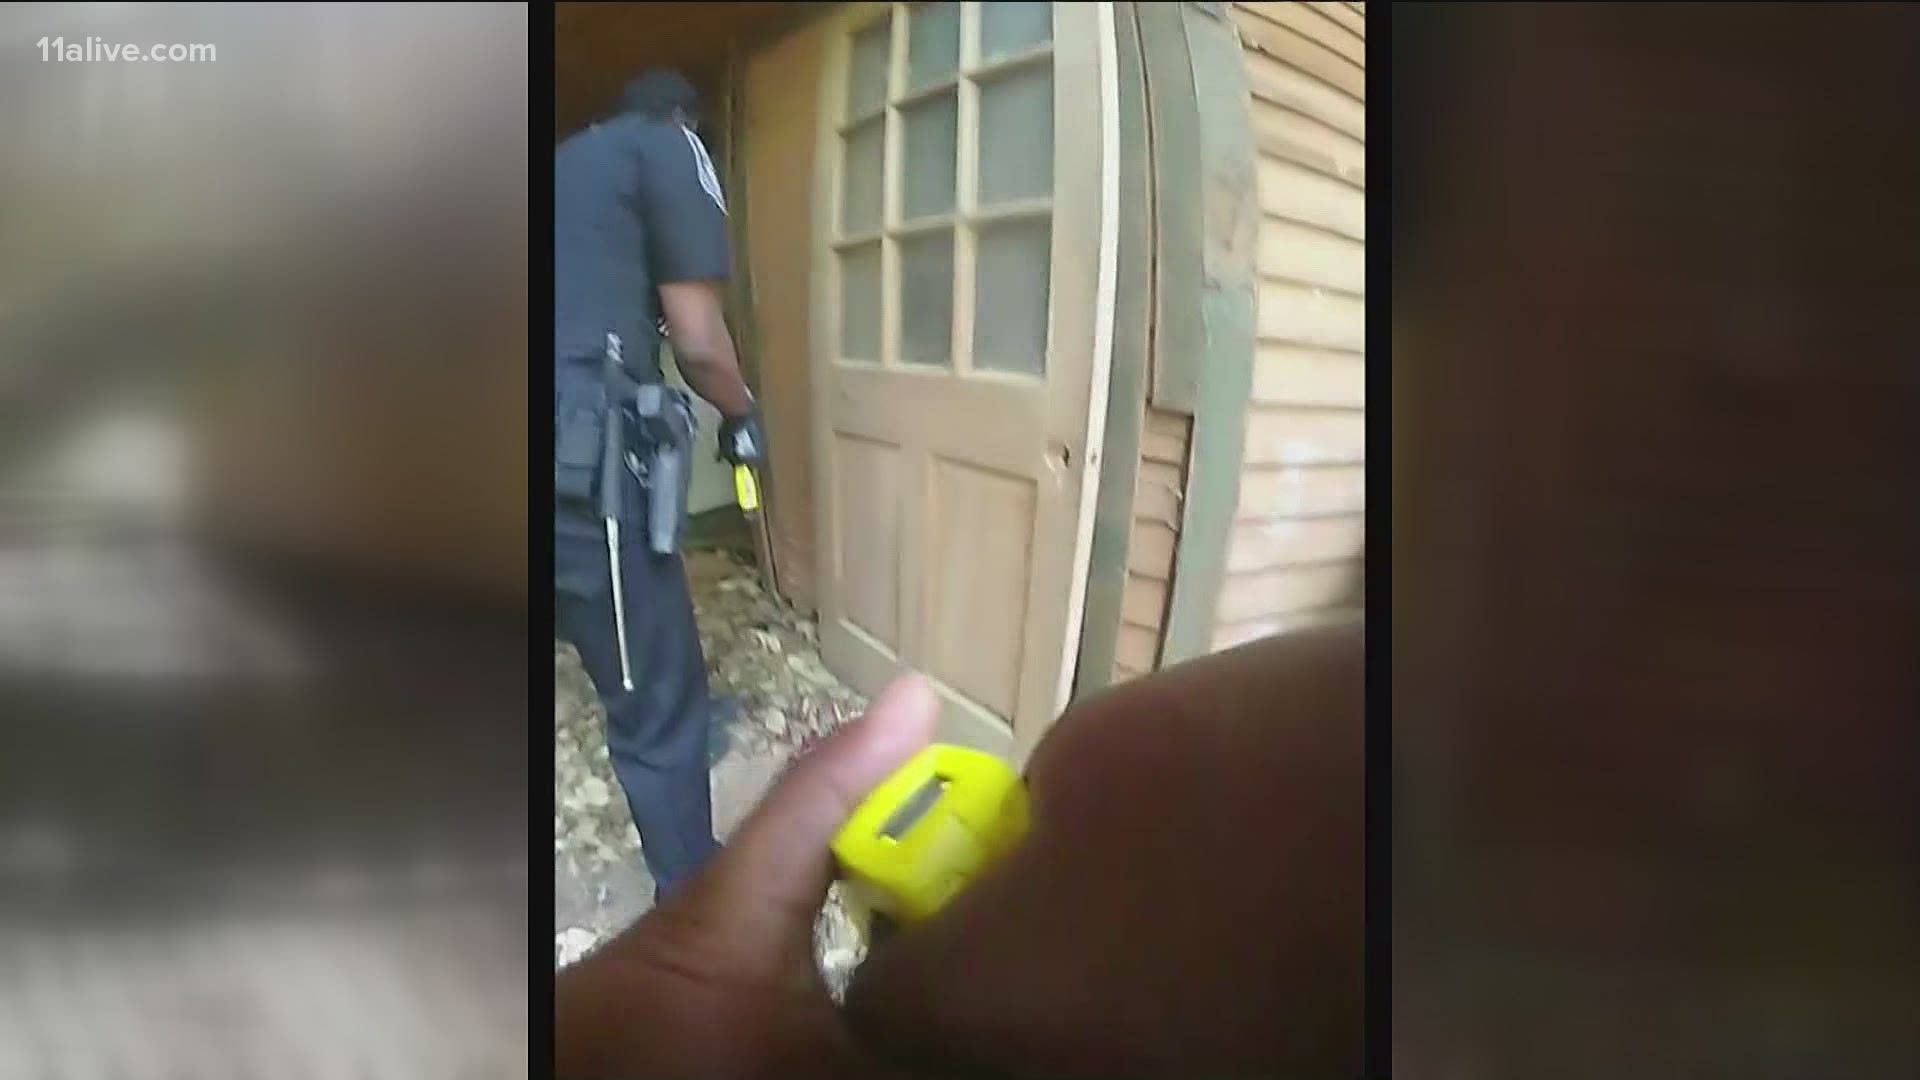 Bodycam: 'You're a Black man. I'm a Black man. You don't have to die today'